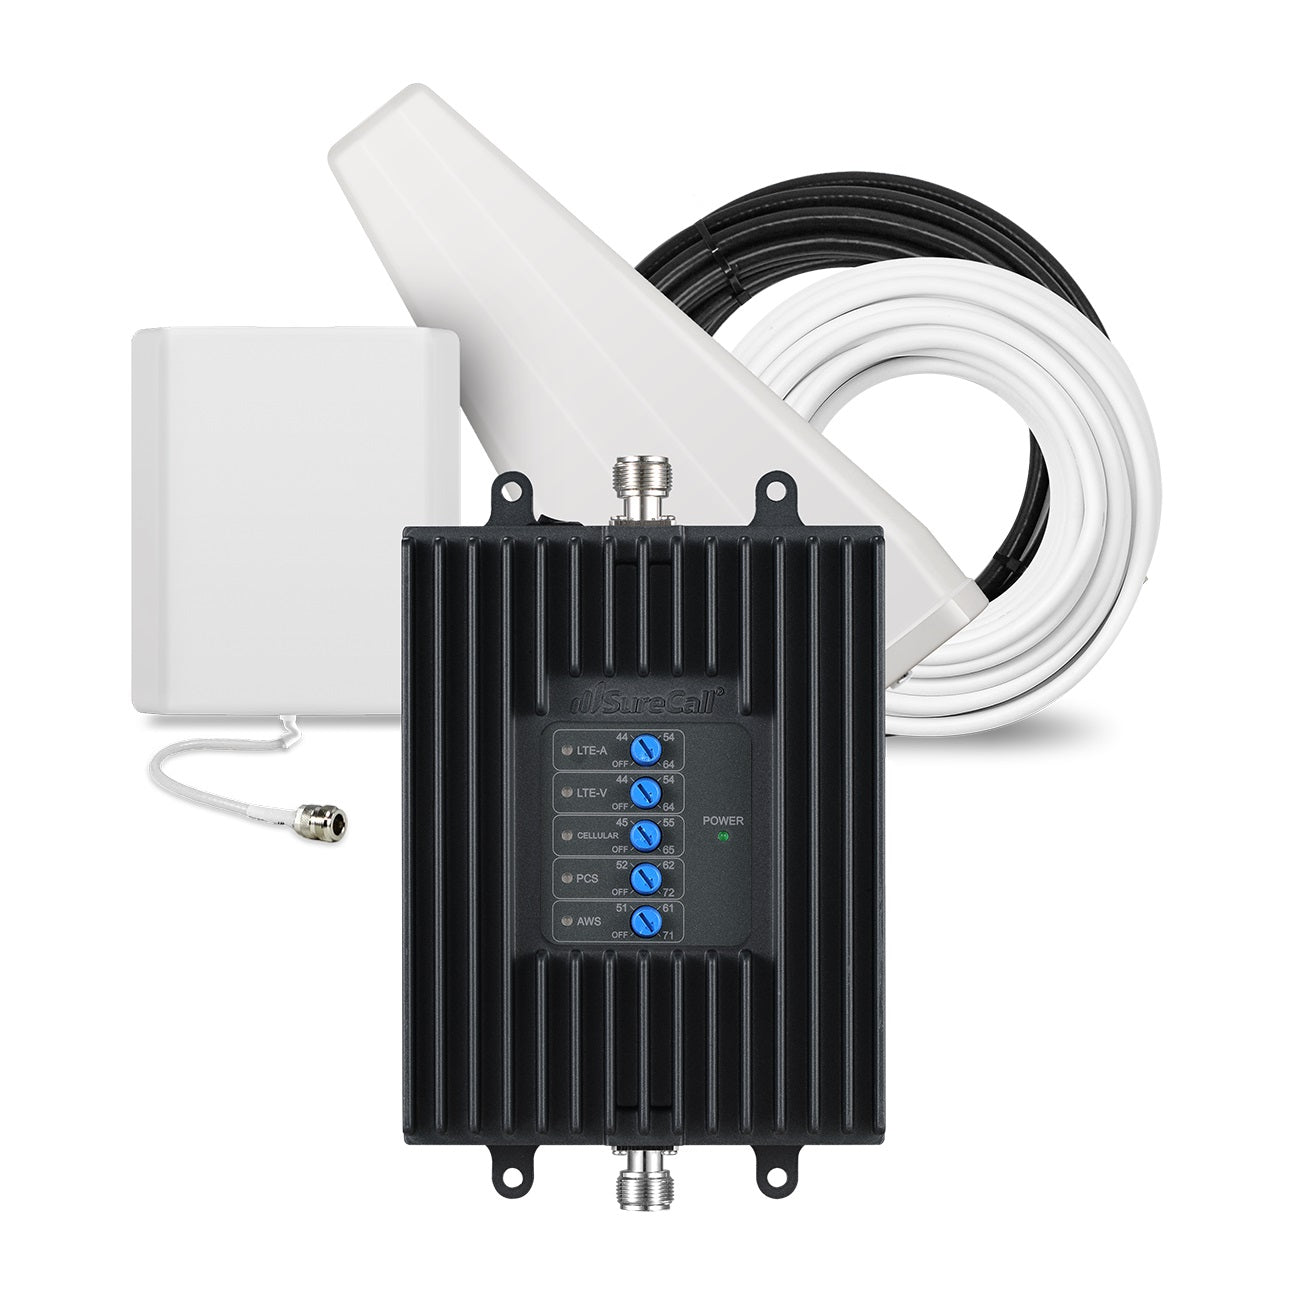 SureCall Fusion Professional Cell Phone Signal Booster, Boosts 5G/4G LTE for All Canadian Carriers, ISED Approved, USA Company